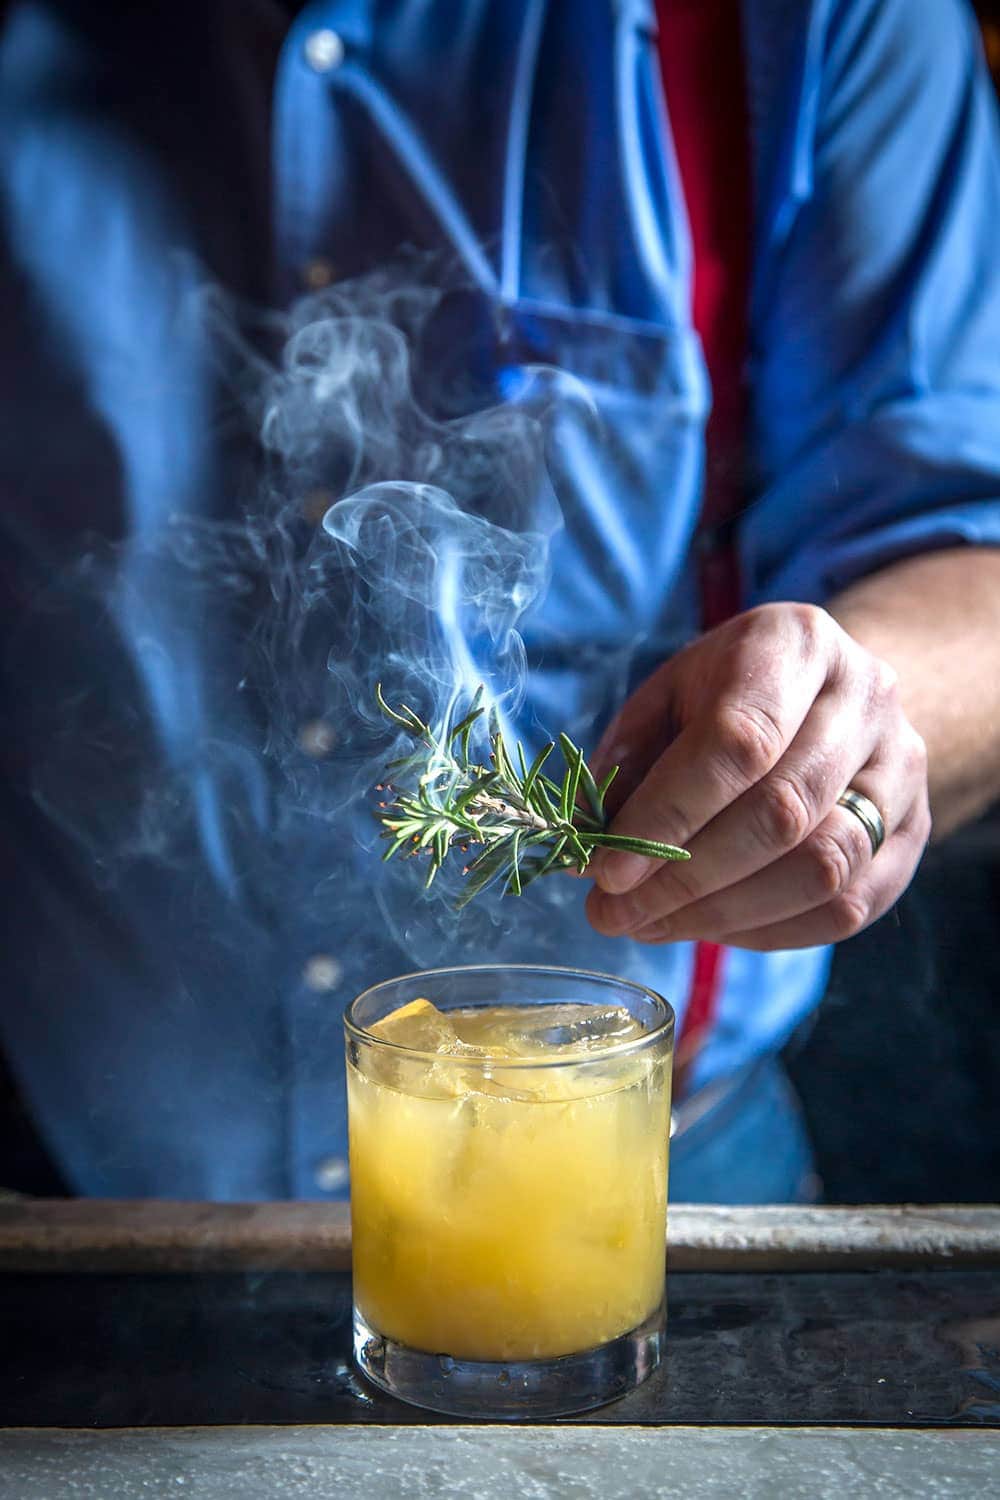 The Warthog spiced pear cocktail